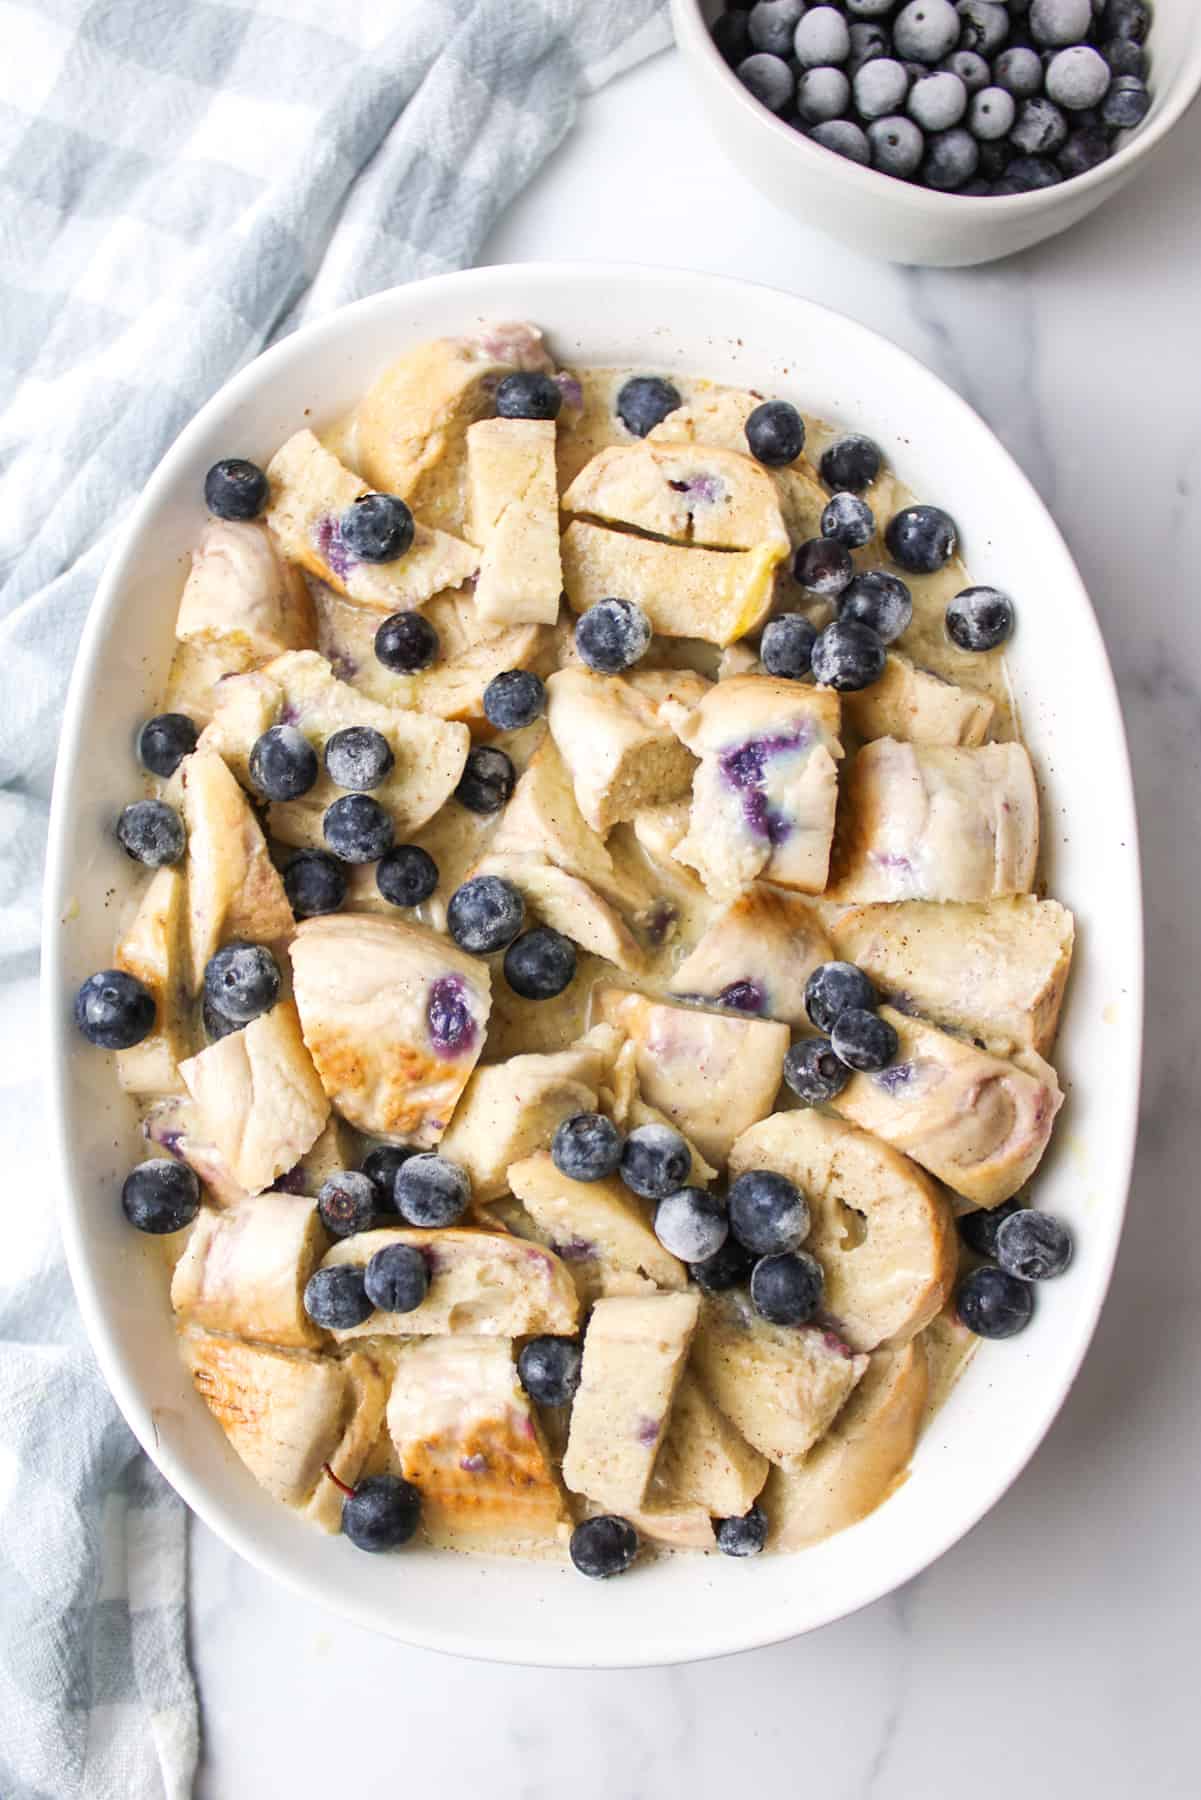 blueberry topped bread and egg mixture in a casserole dish